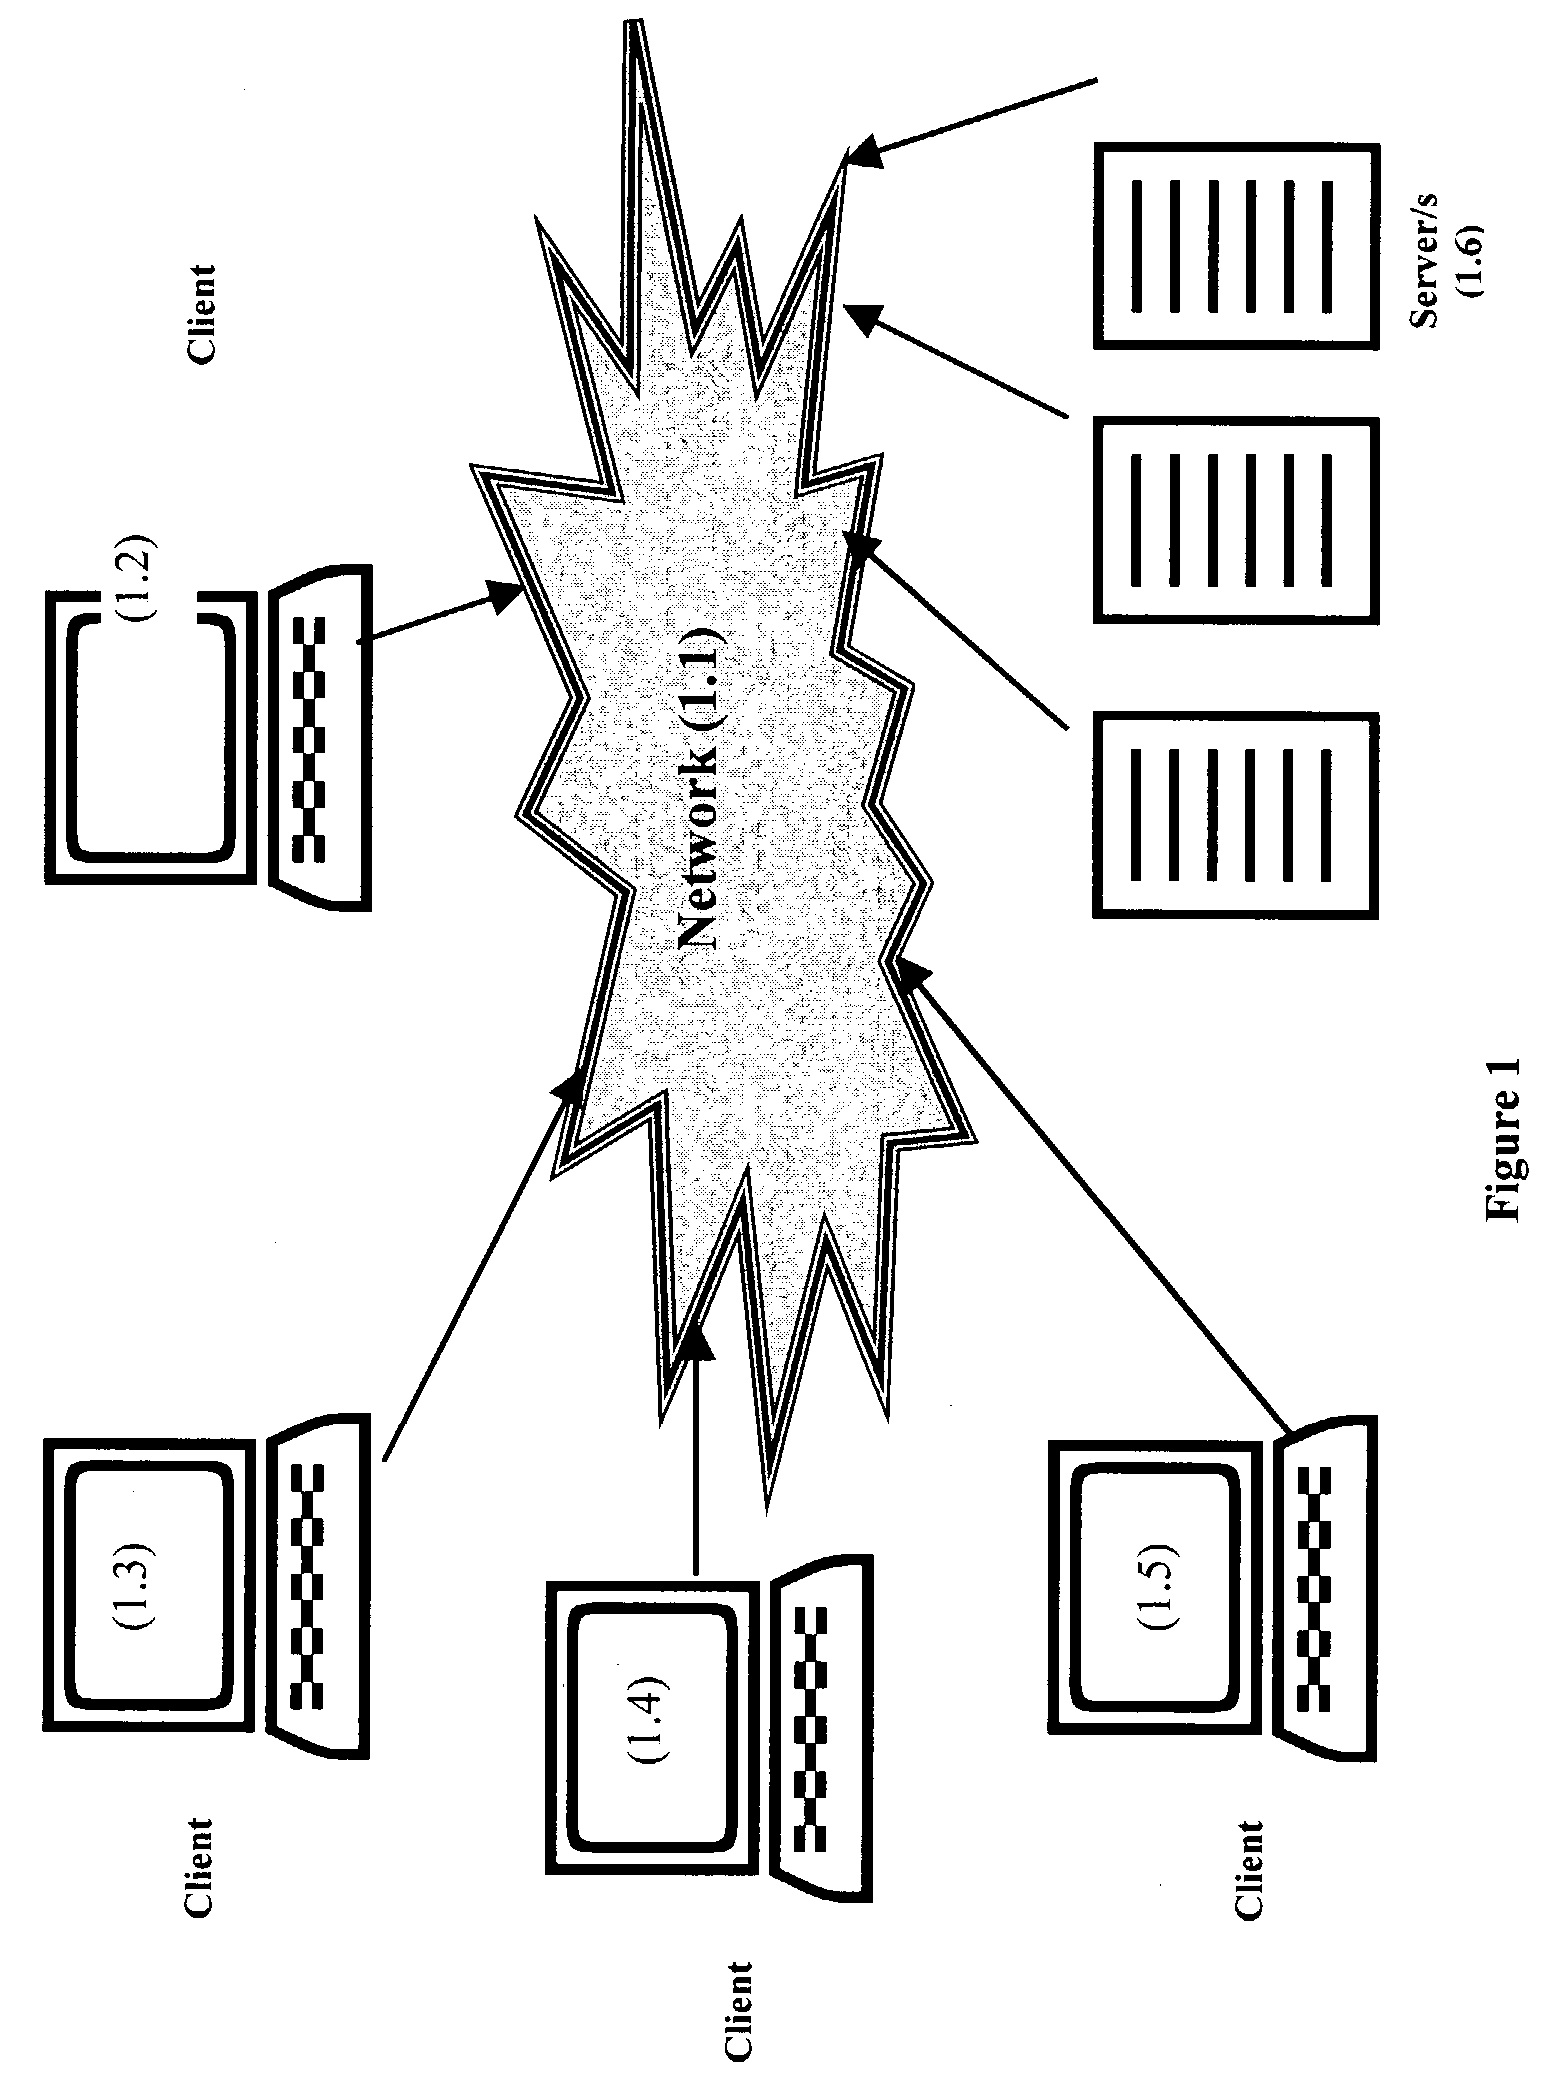 Method and system for conducting online marketing research in a controlled manner